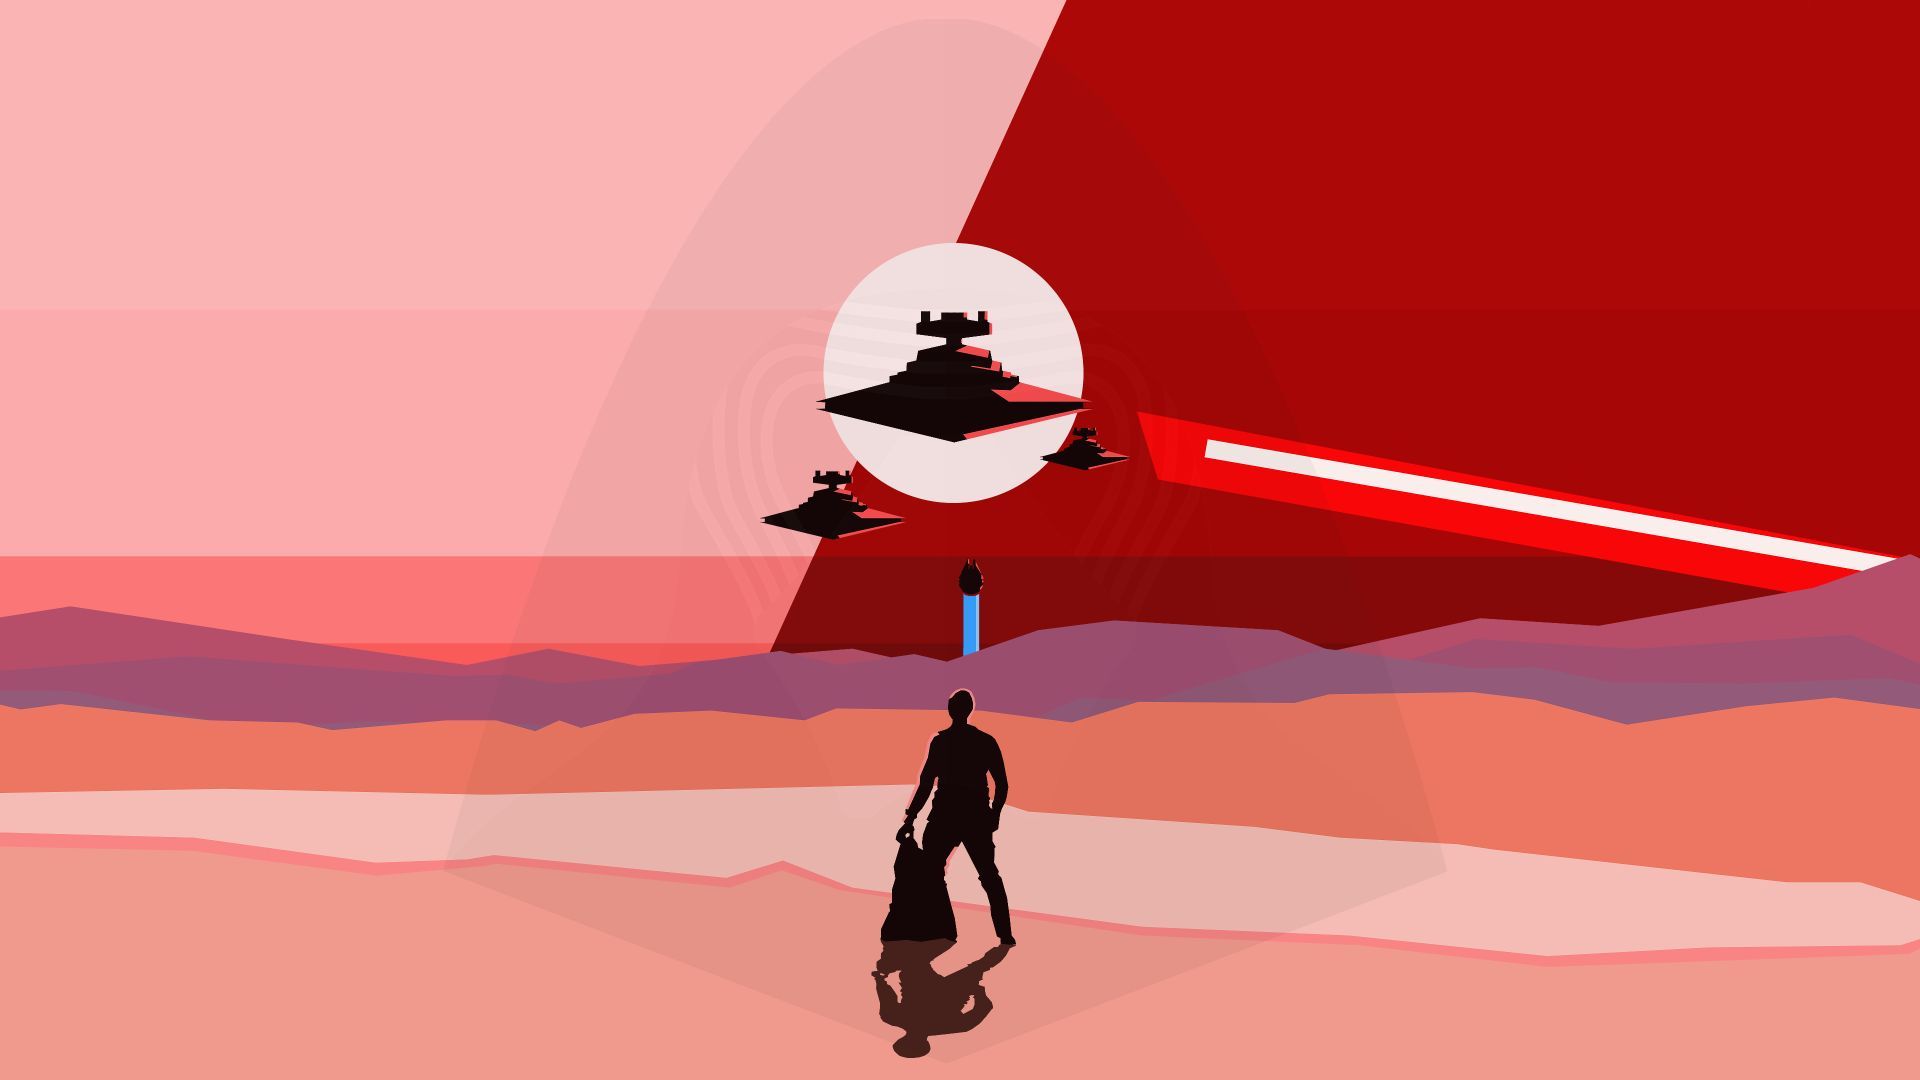 A man standing in the desert with two flying saucers - Star Wars